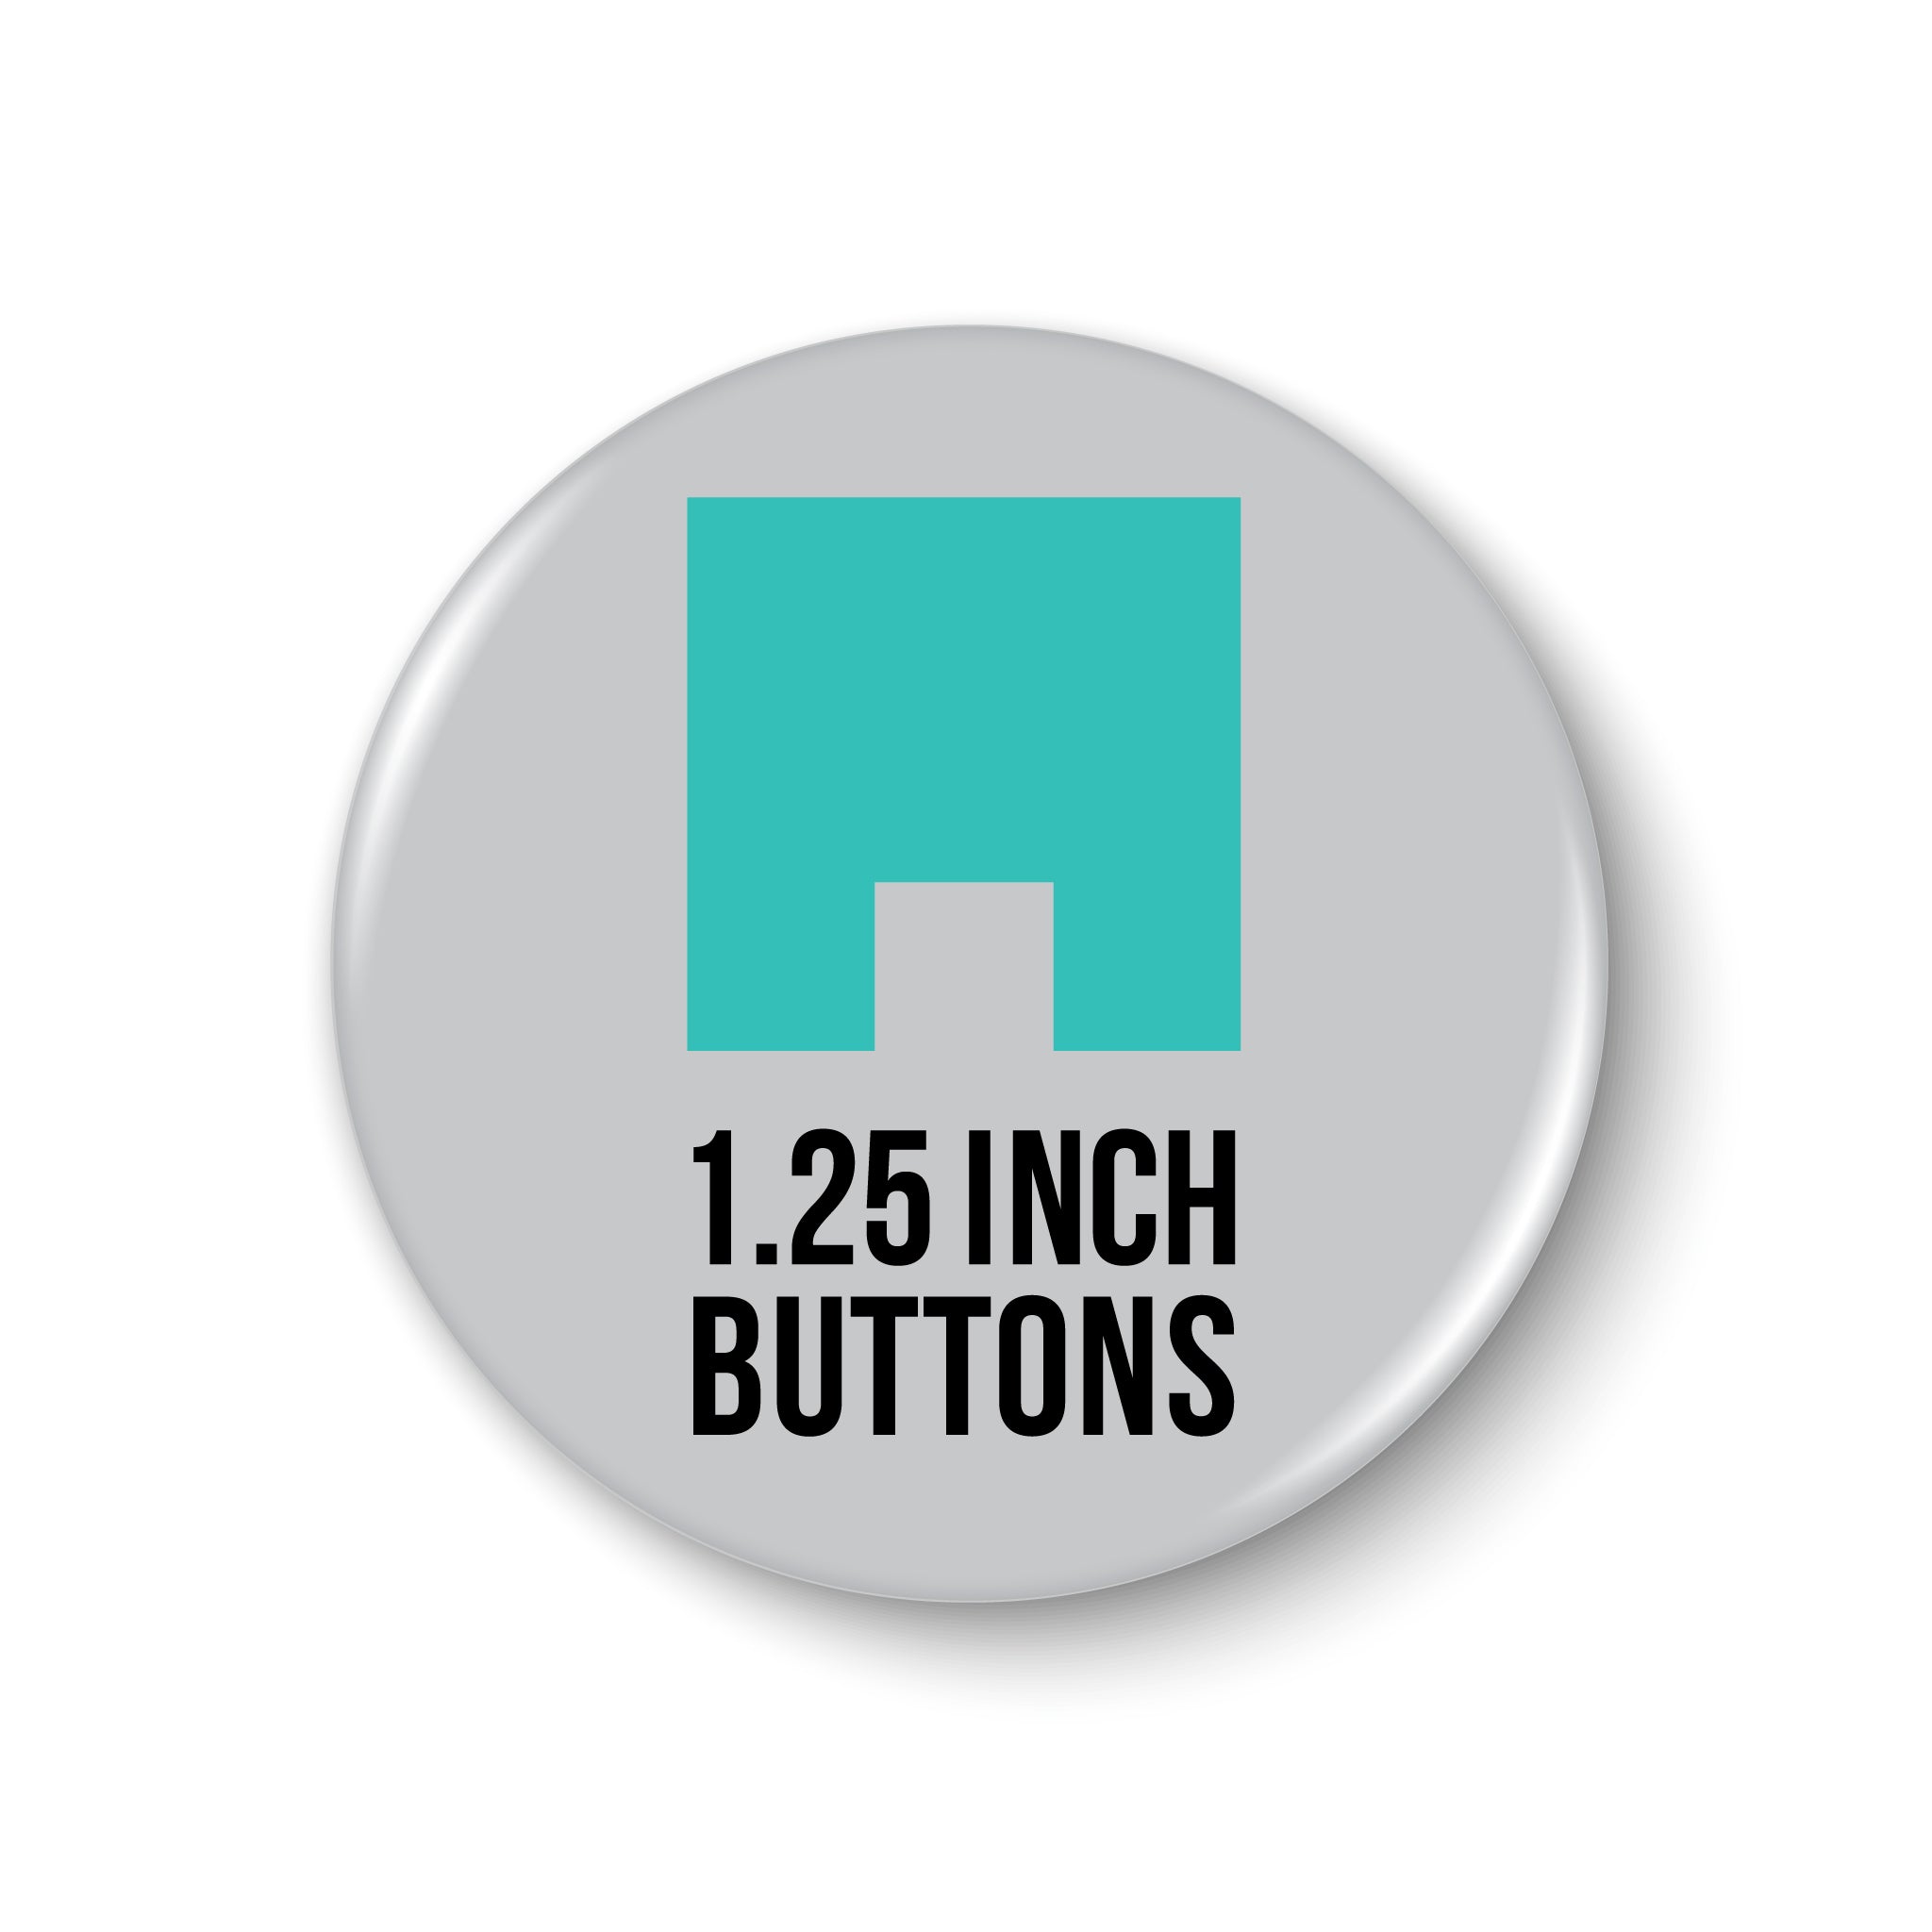 1.25" Buttons